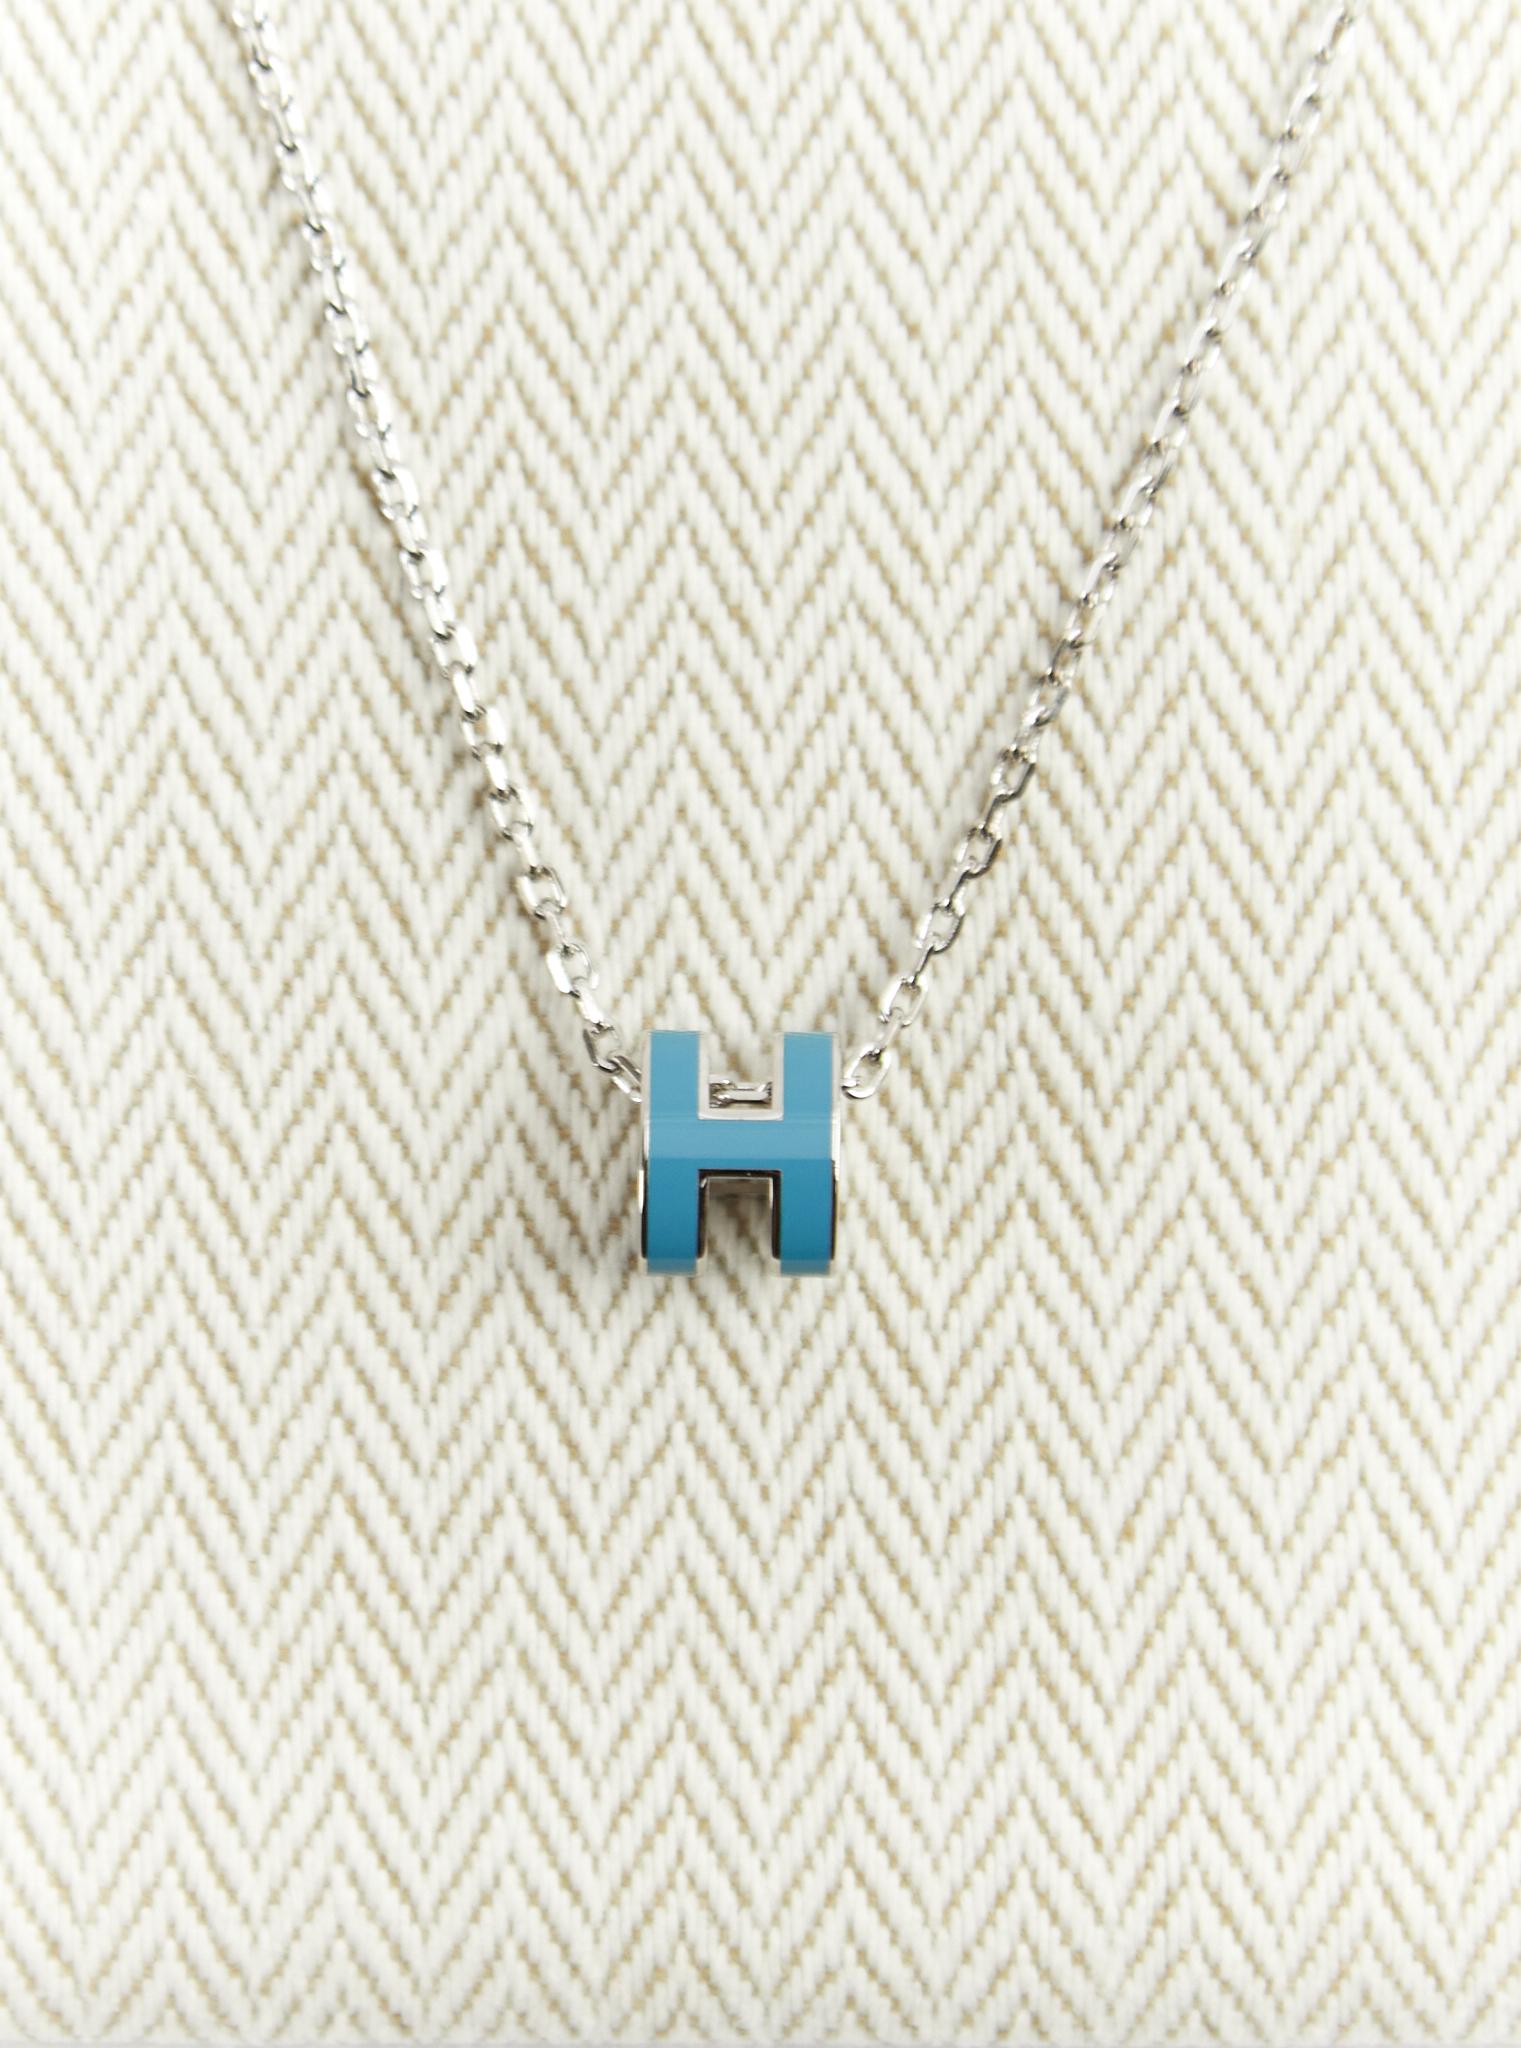 Hermès Mini Pop H Necklace in Blue Jean & Palladium

Chain length: 40cm

Made in France 

Accompanied by: Hermès box, dust bag and ribbon